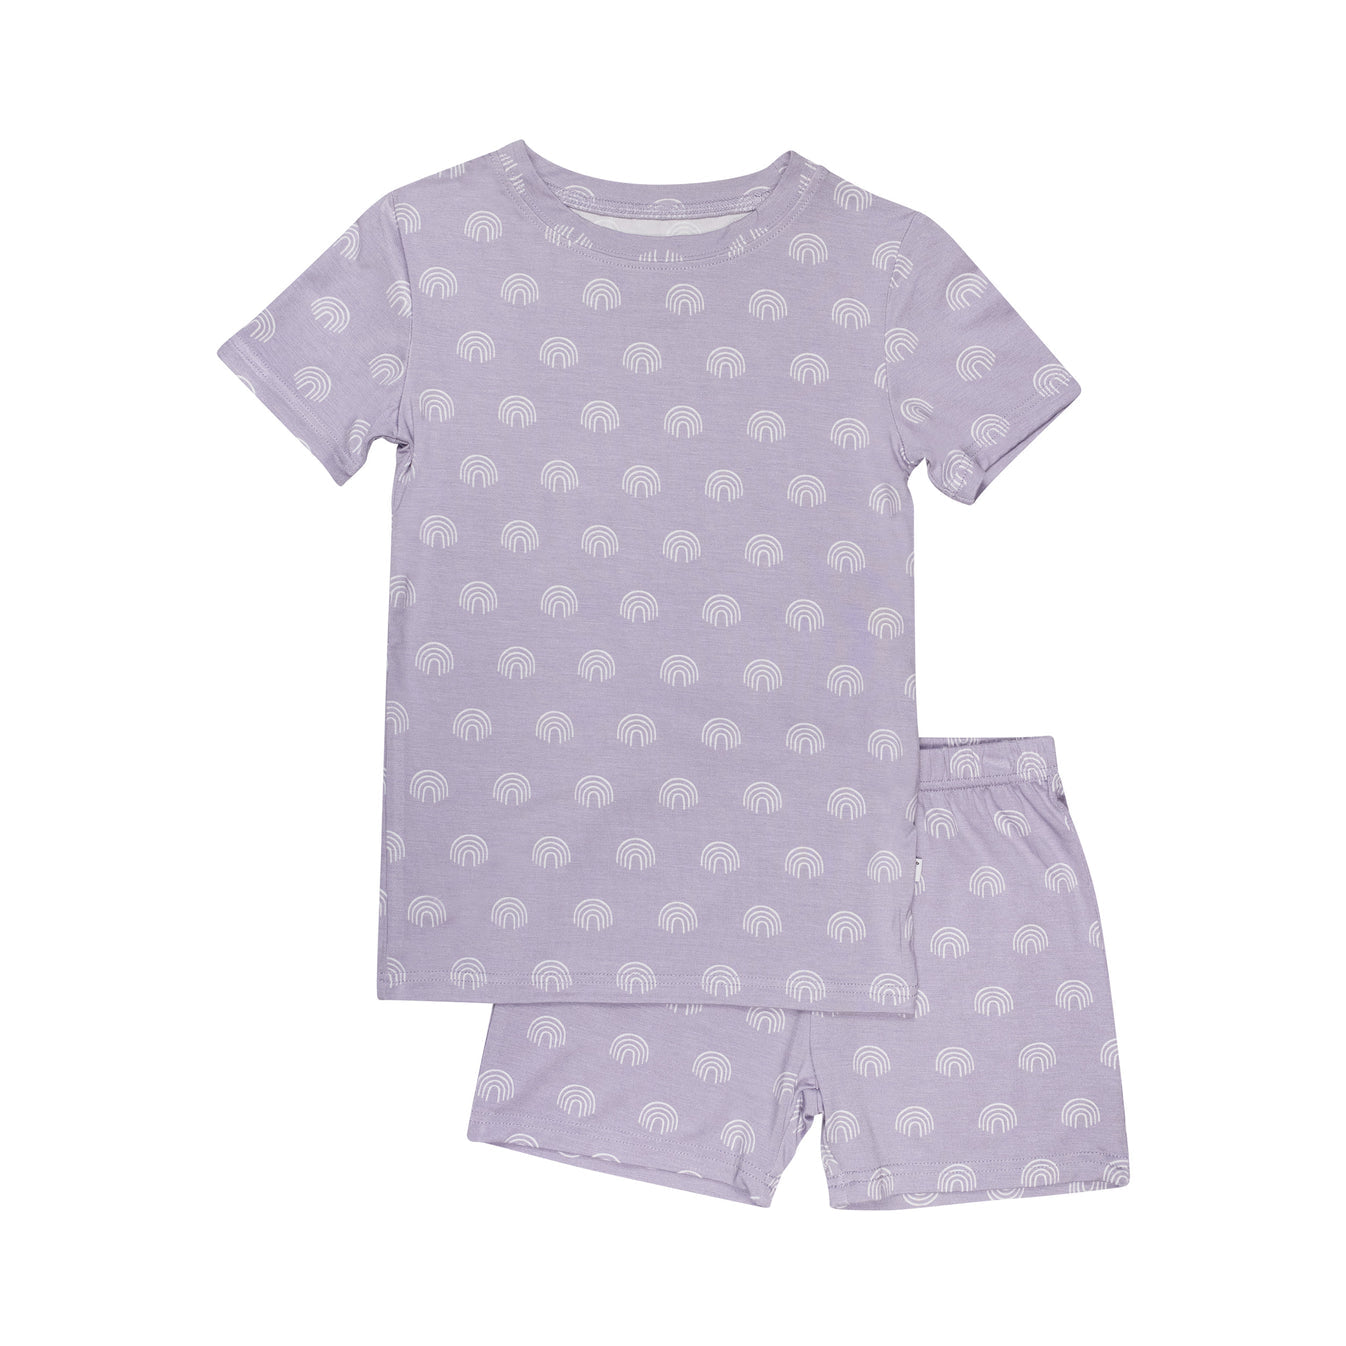  Little Girls All in One Under Shorts - Lavender - 2